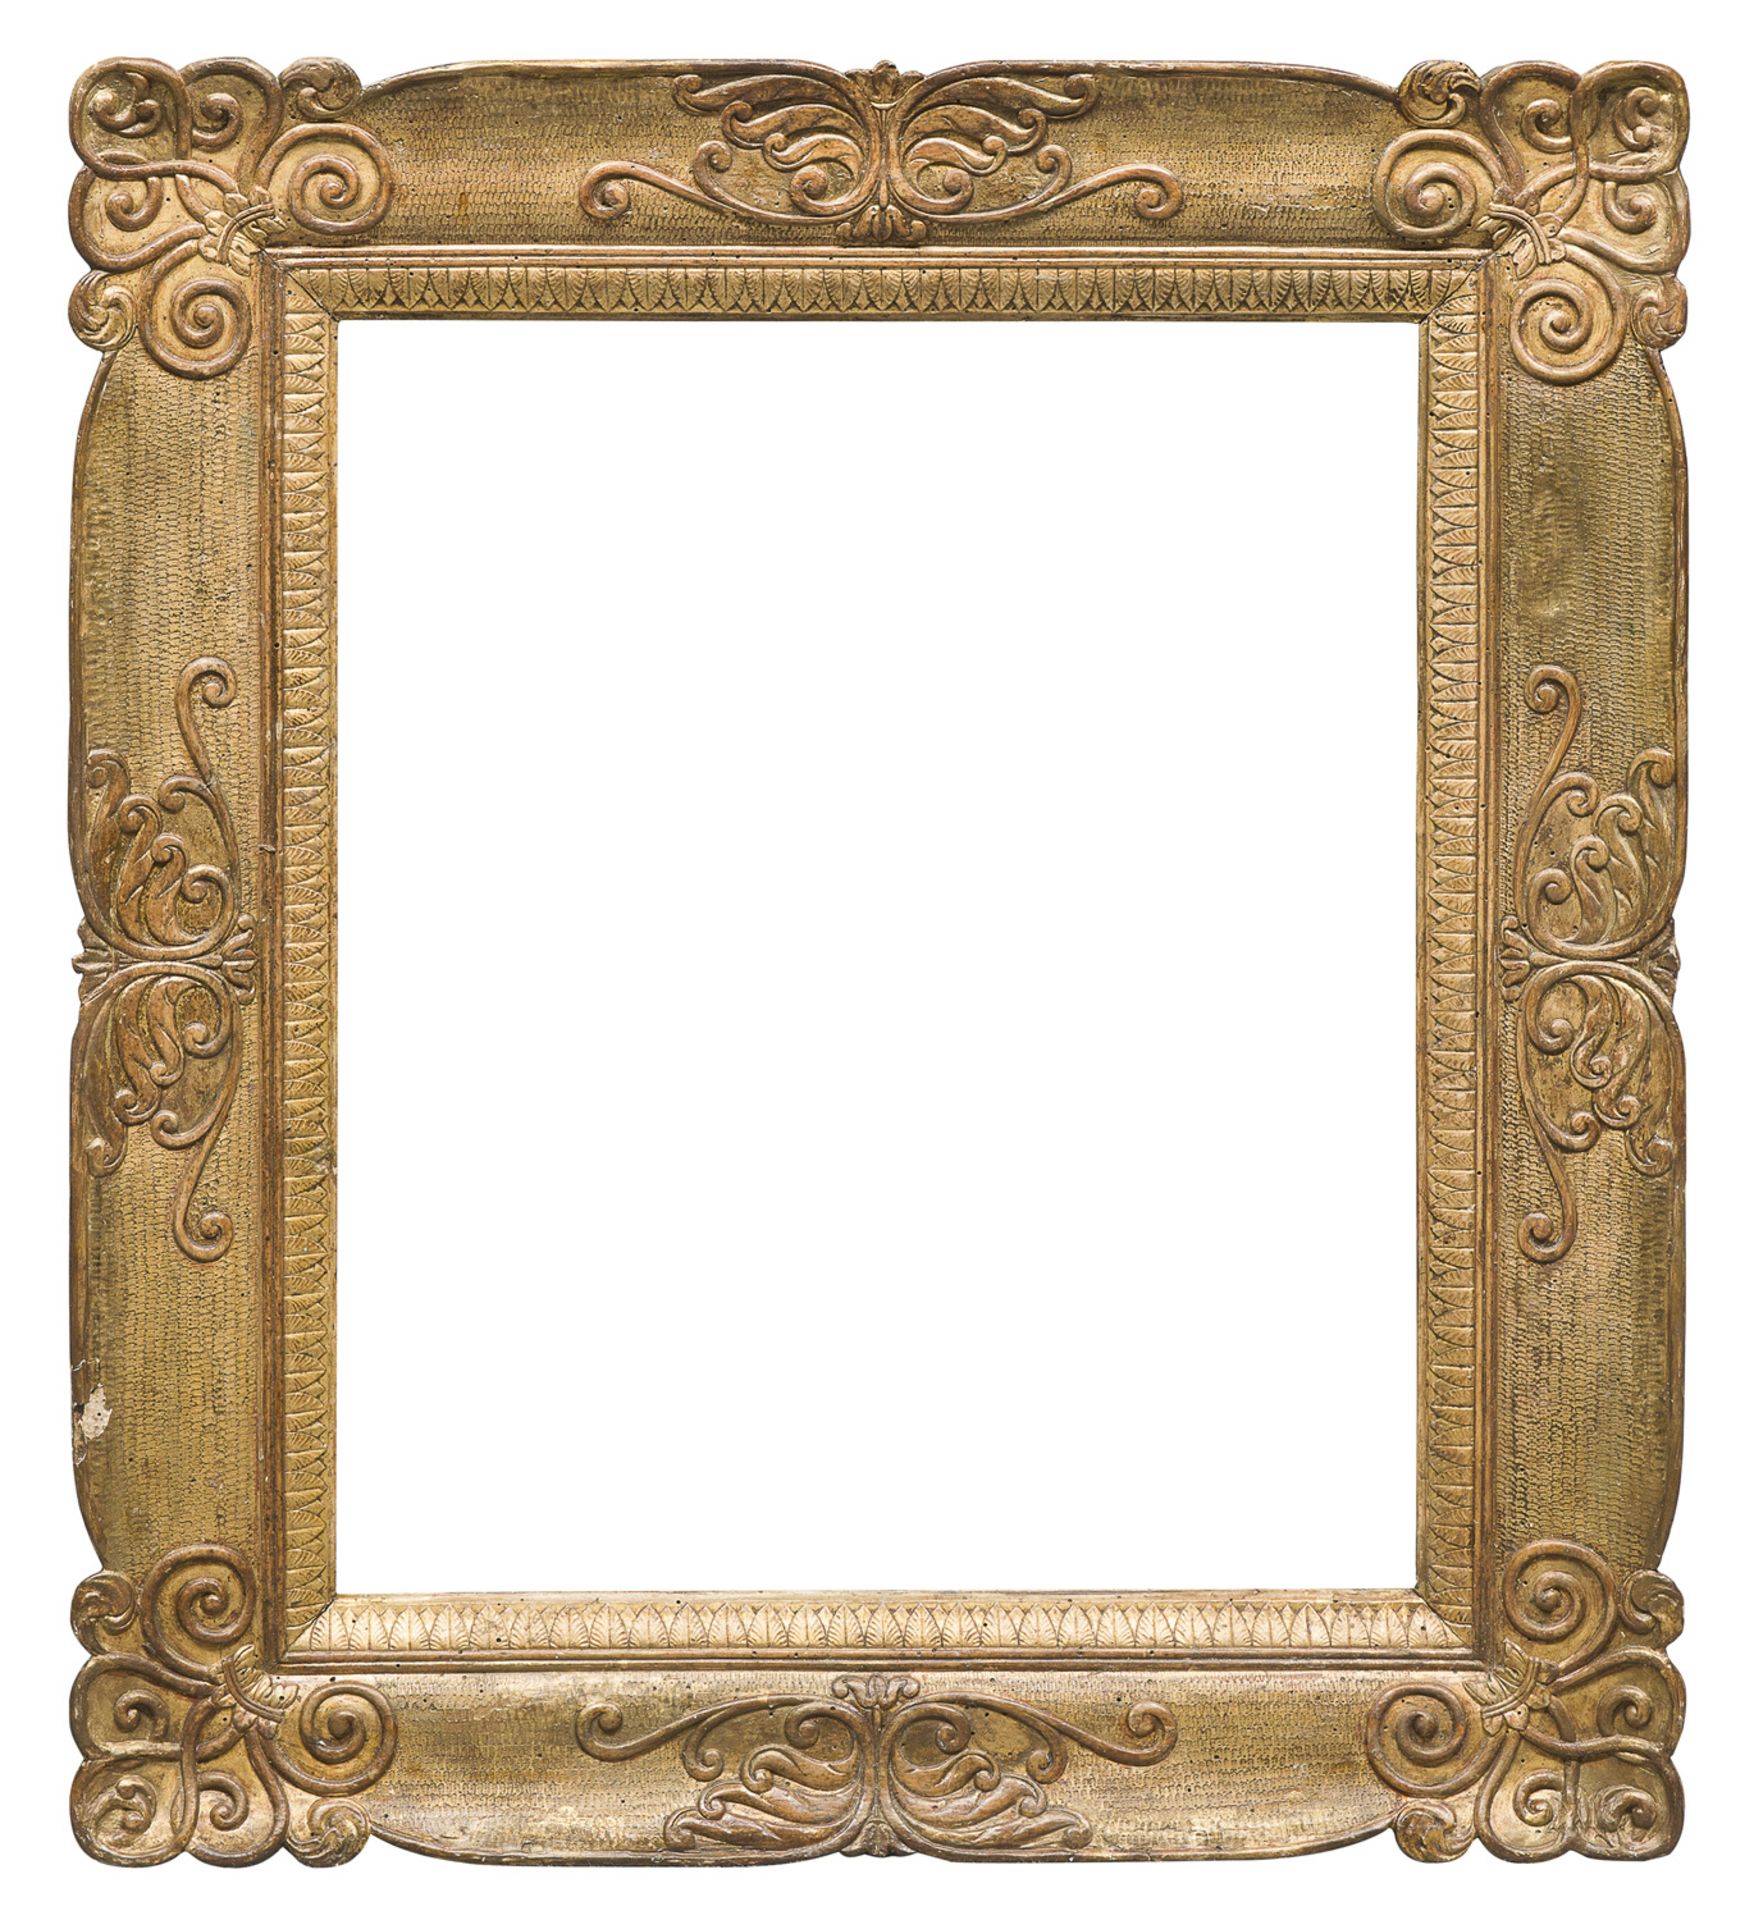 FRAME IN GILTWOOD NAPLES 19TH CENTURY